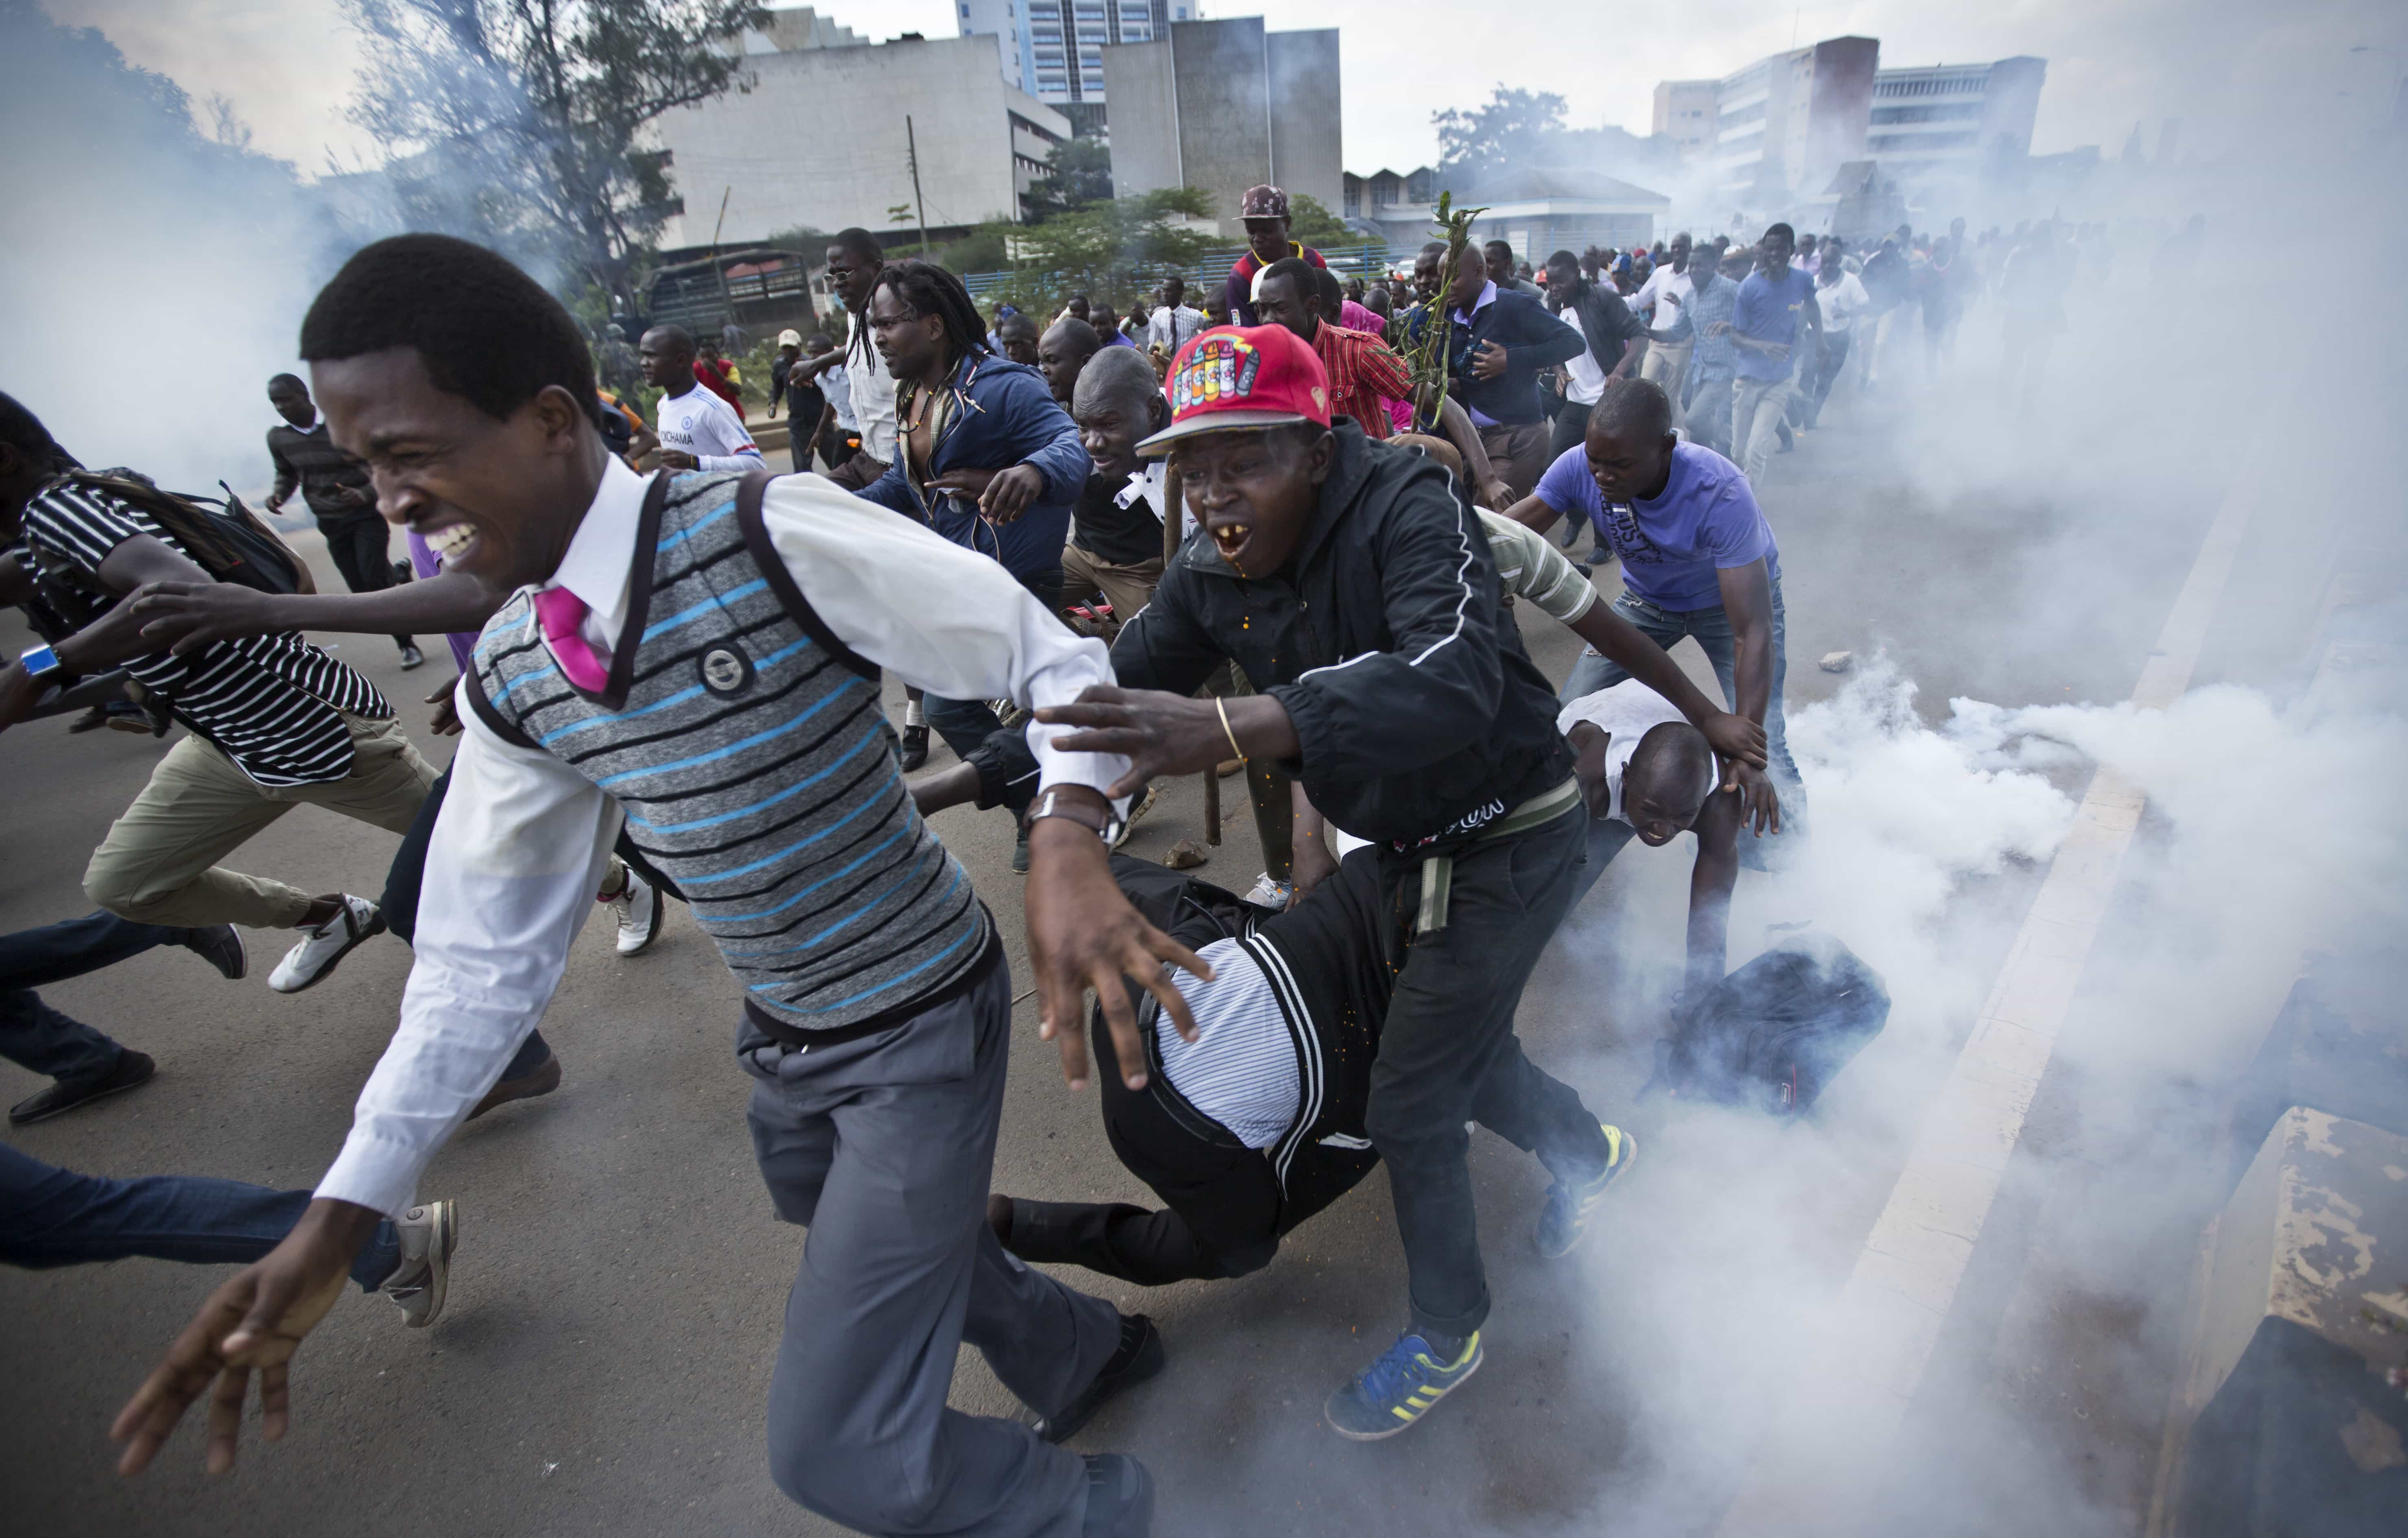 Opposition supporters flee from tear gas grenades fired by riot police, during a protest in downtown Nairobi, 16 May 2016, AP Photo/Ben Curtis